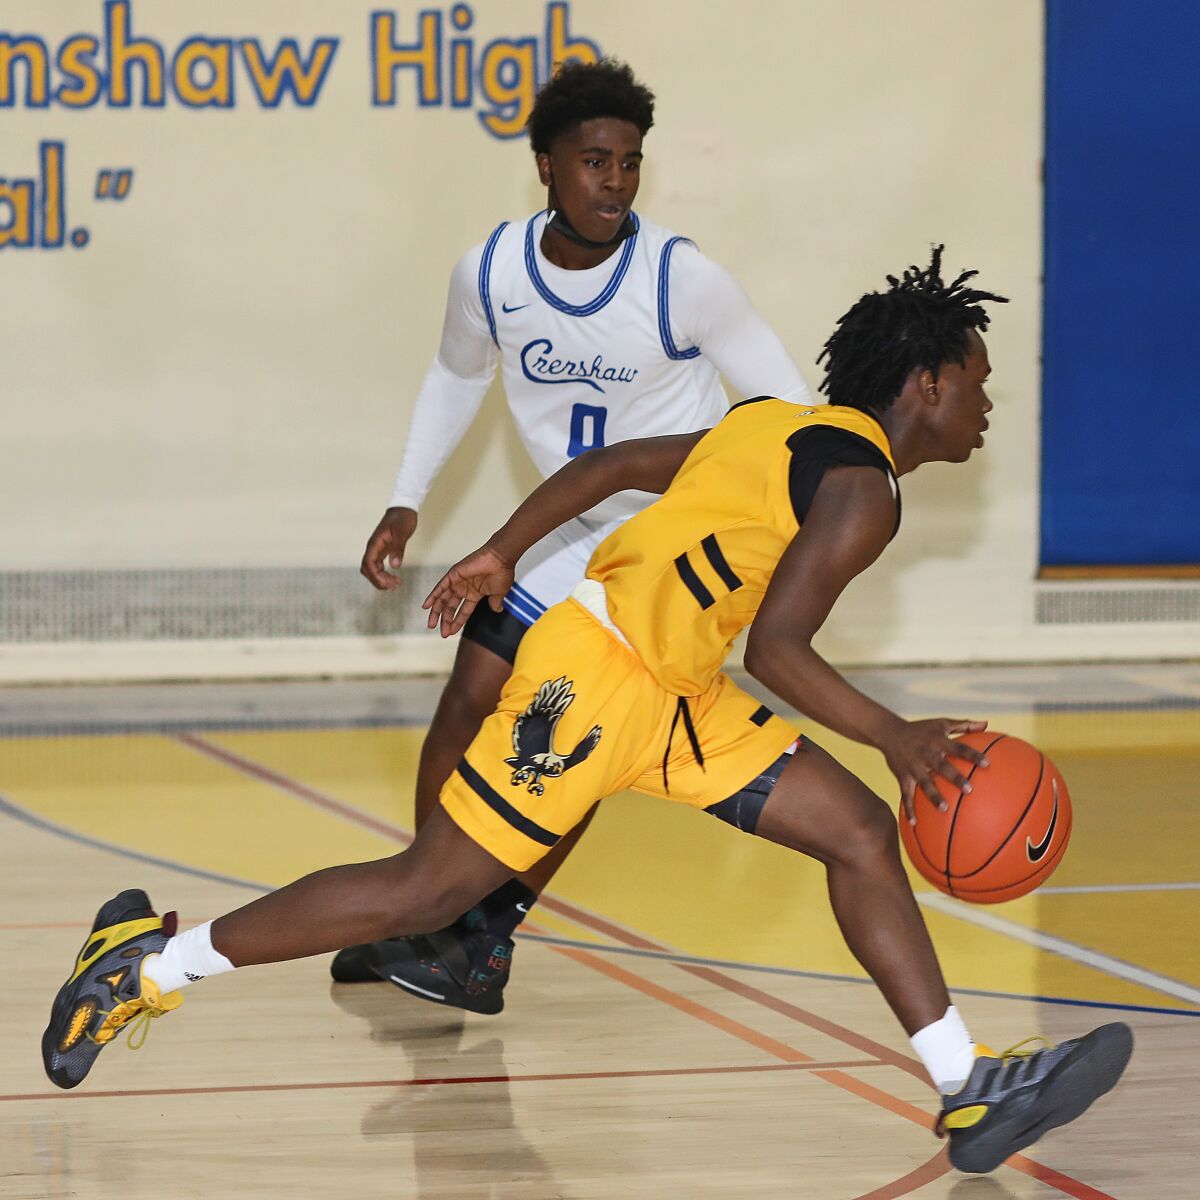 Kalib LaCount of King/Drew attacks on offense against Crenshaw.